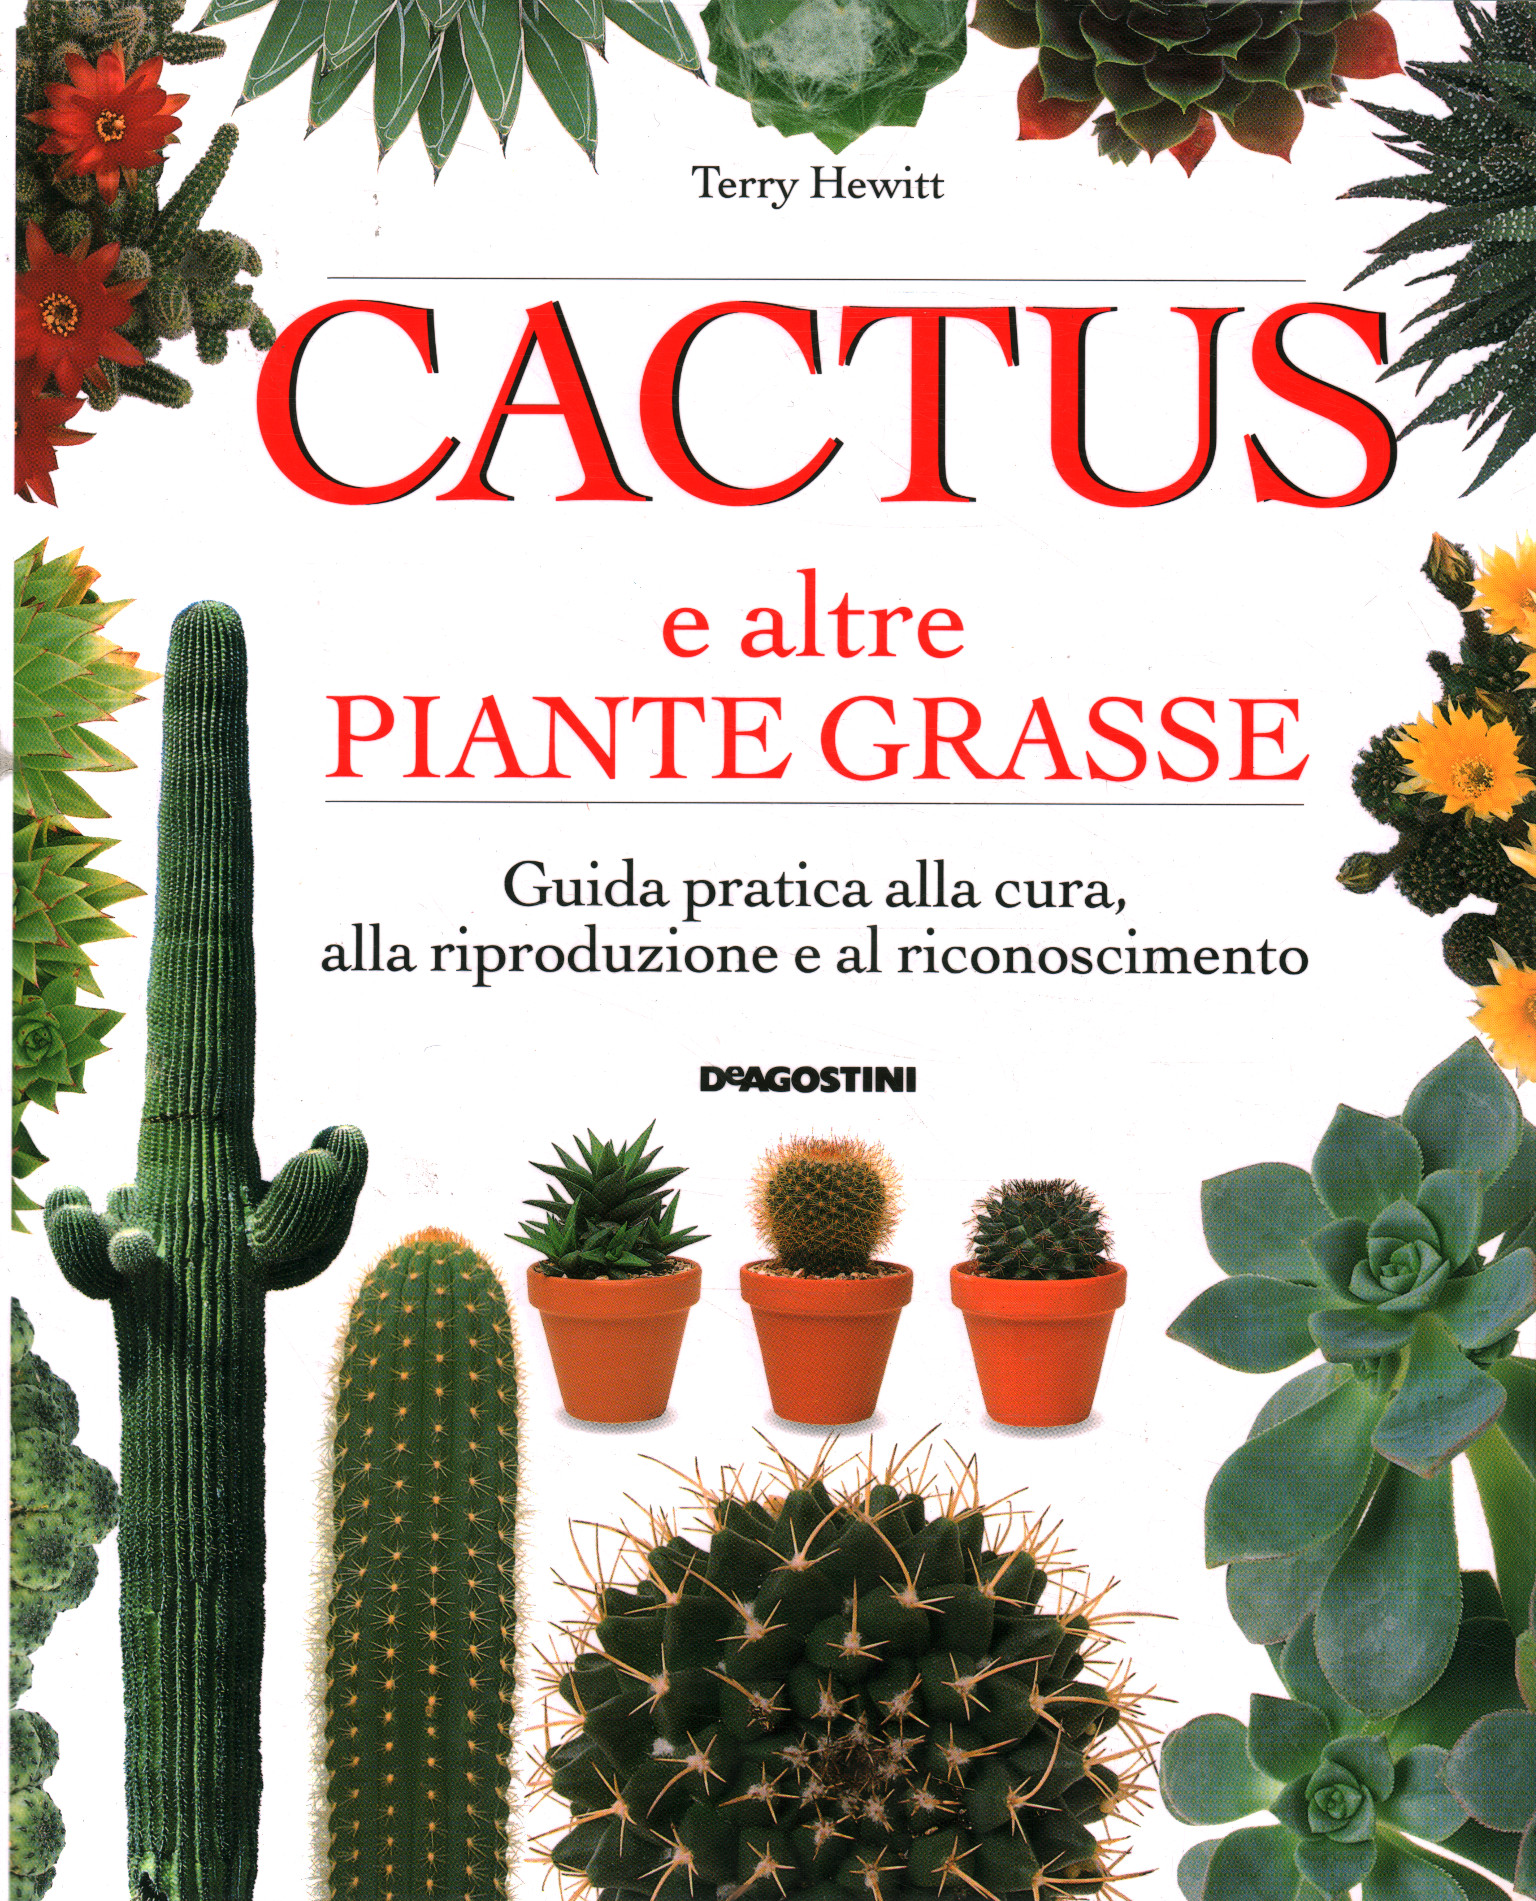 Cacti and other succulents